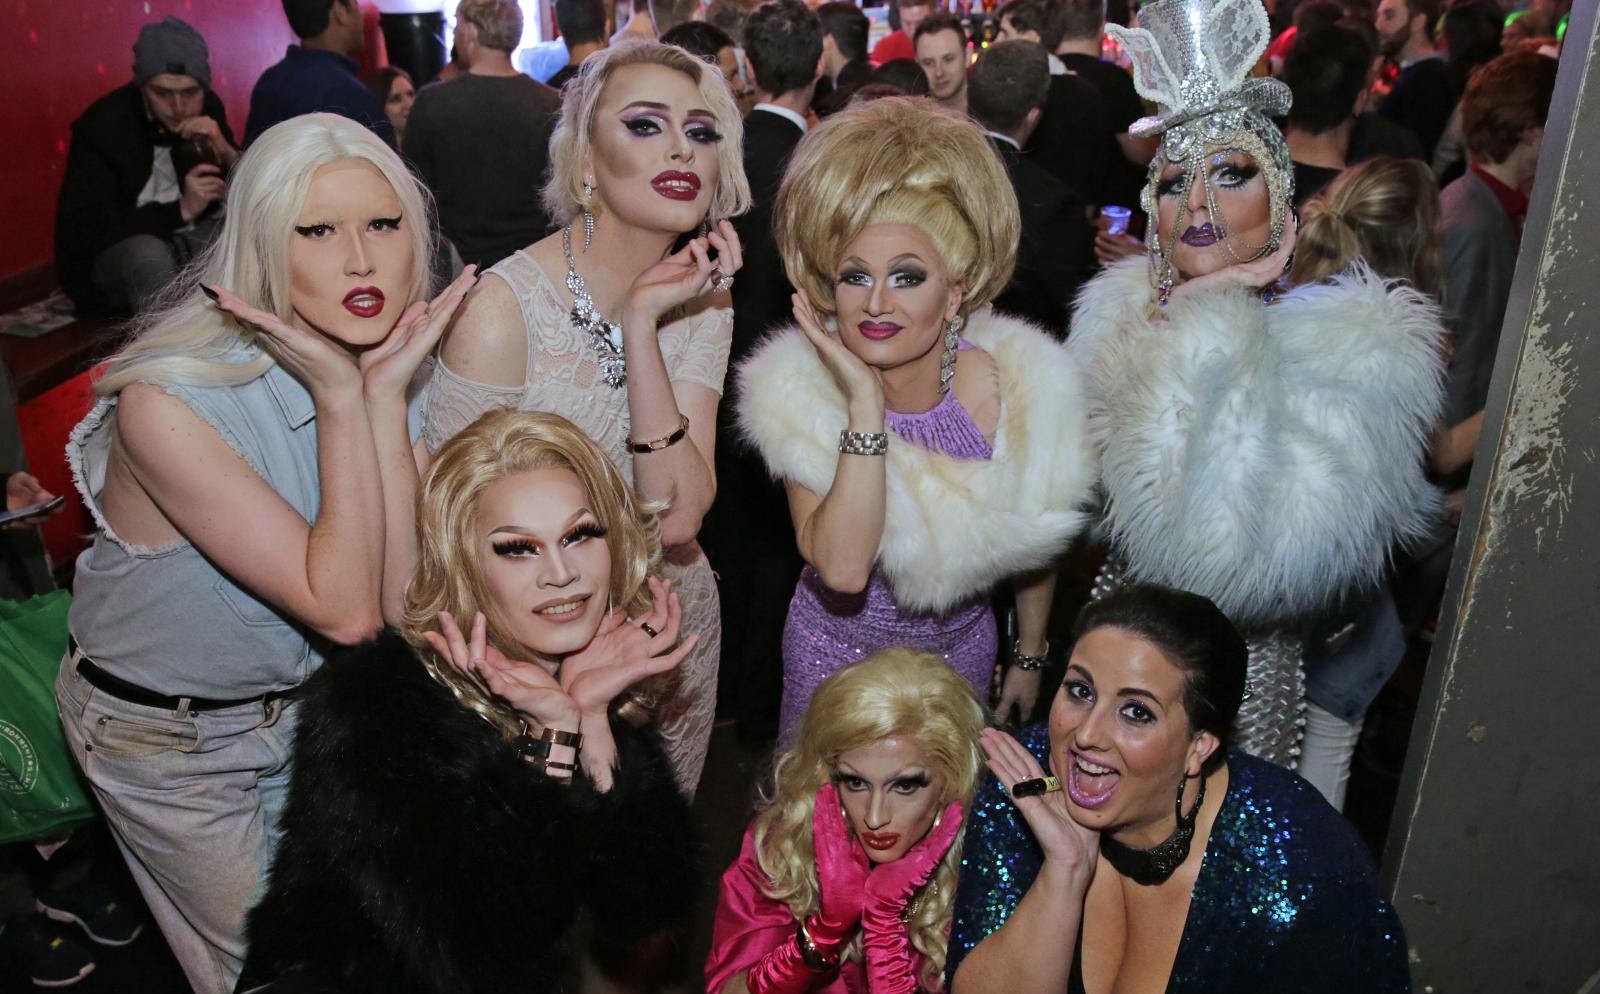 GALLERY: Orgy of Drag